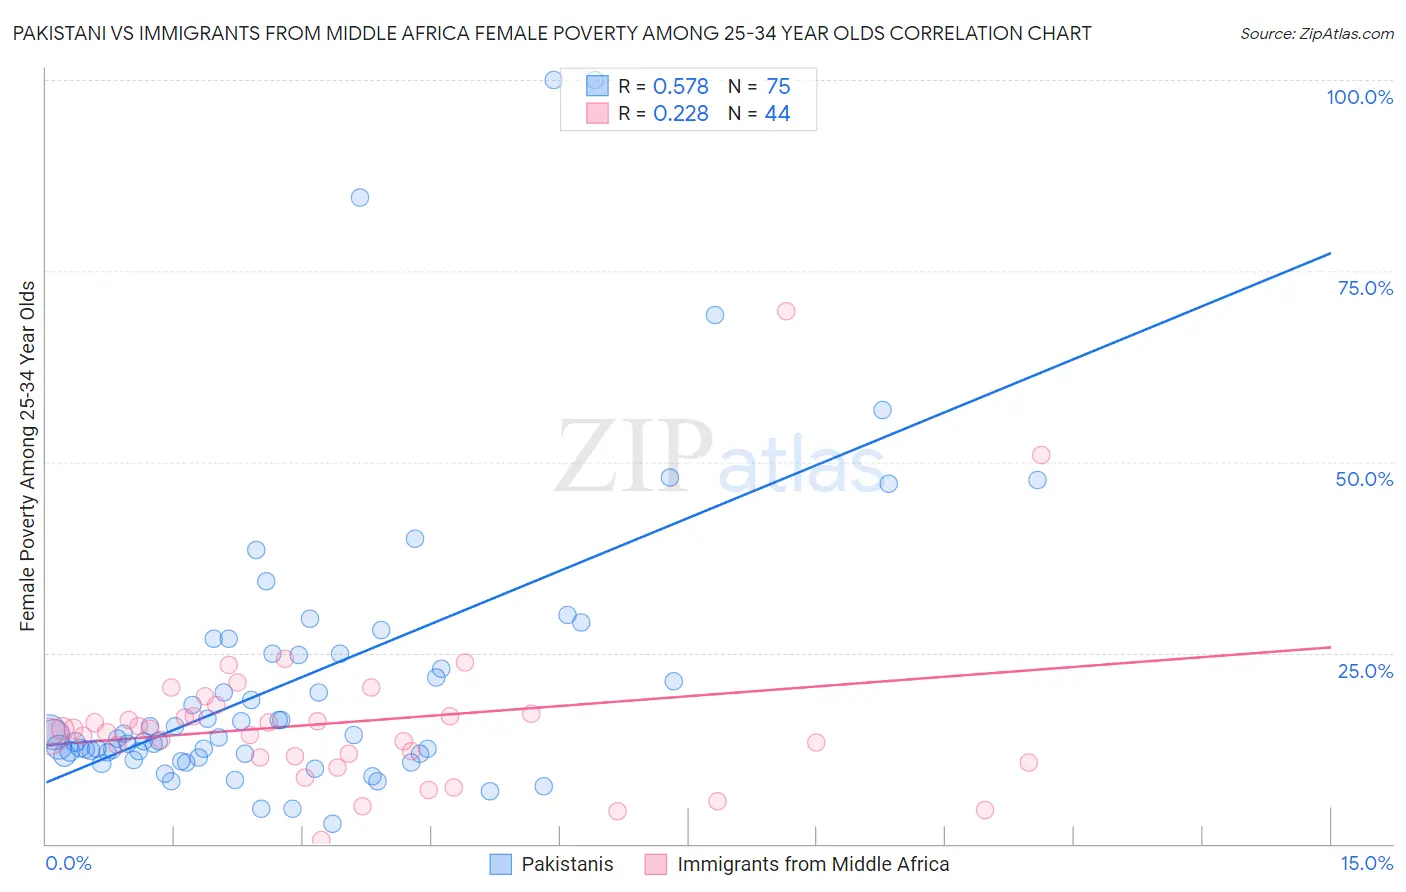 Pakistani vs Immigrants from Middle Africa Female Poverty Among 25-34 Year Olds